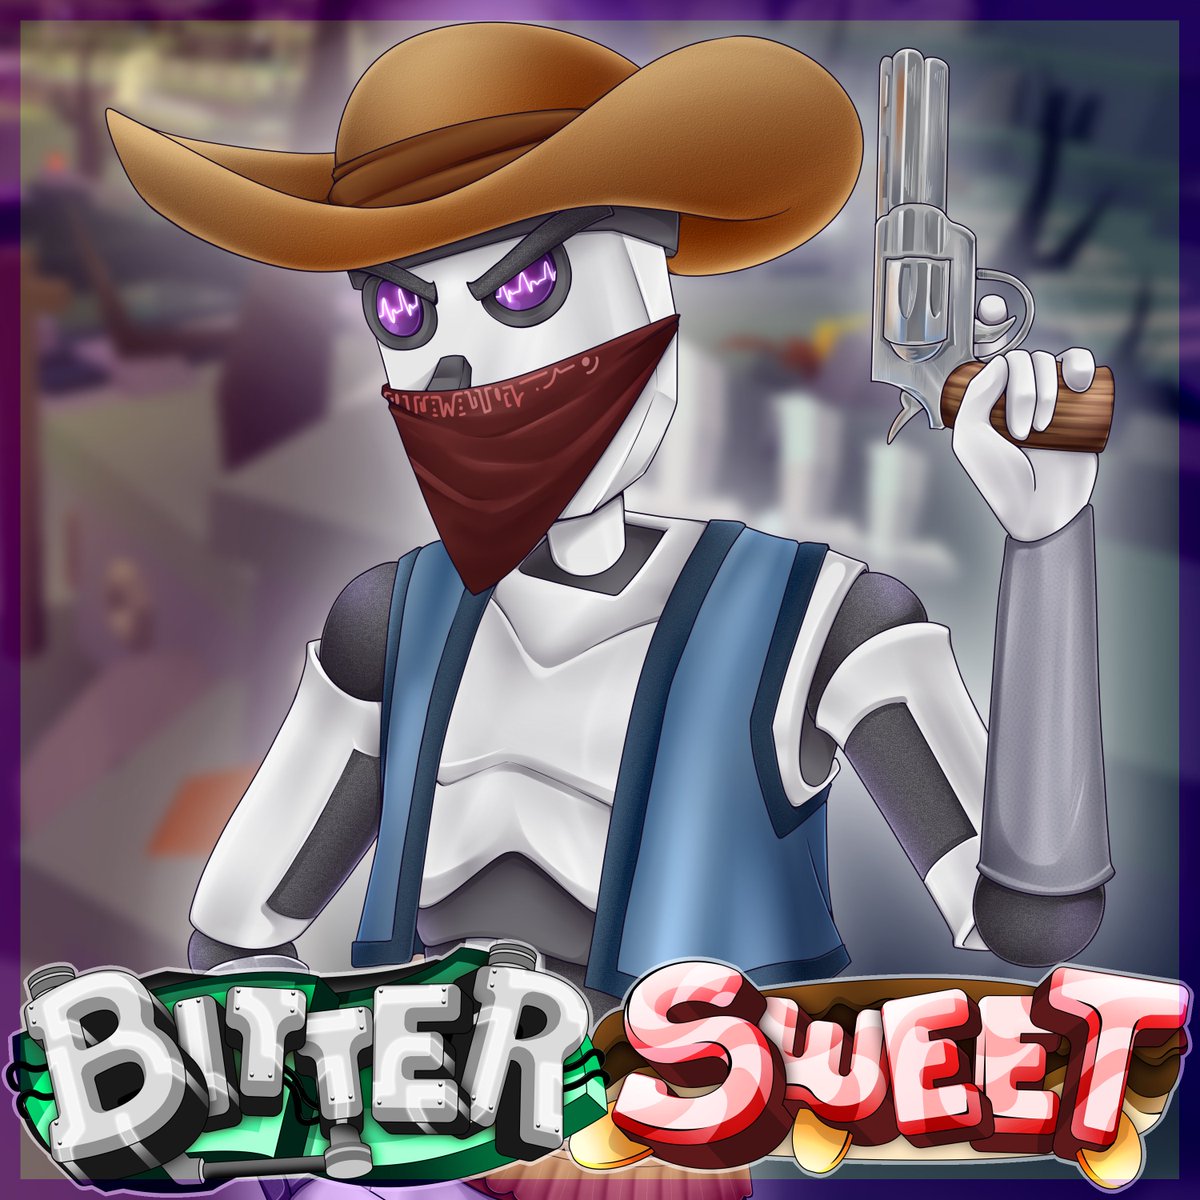 Roblox On Twitter Sweet Bittersweets At Myzta And - code for bittersweet roblox